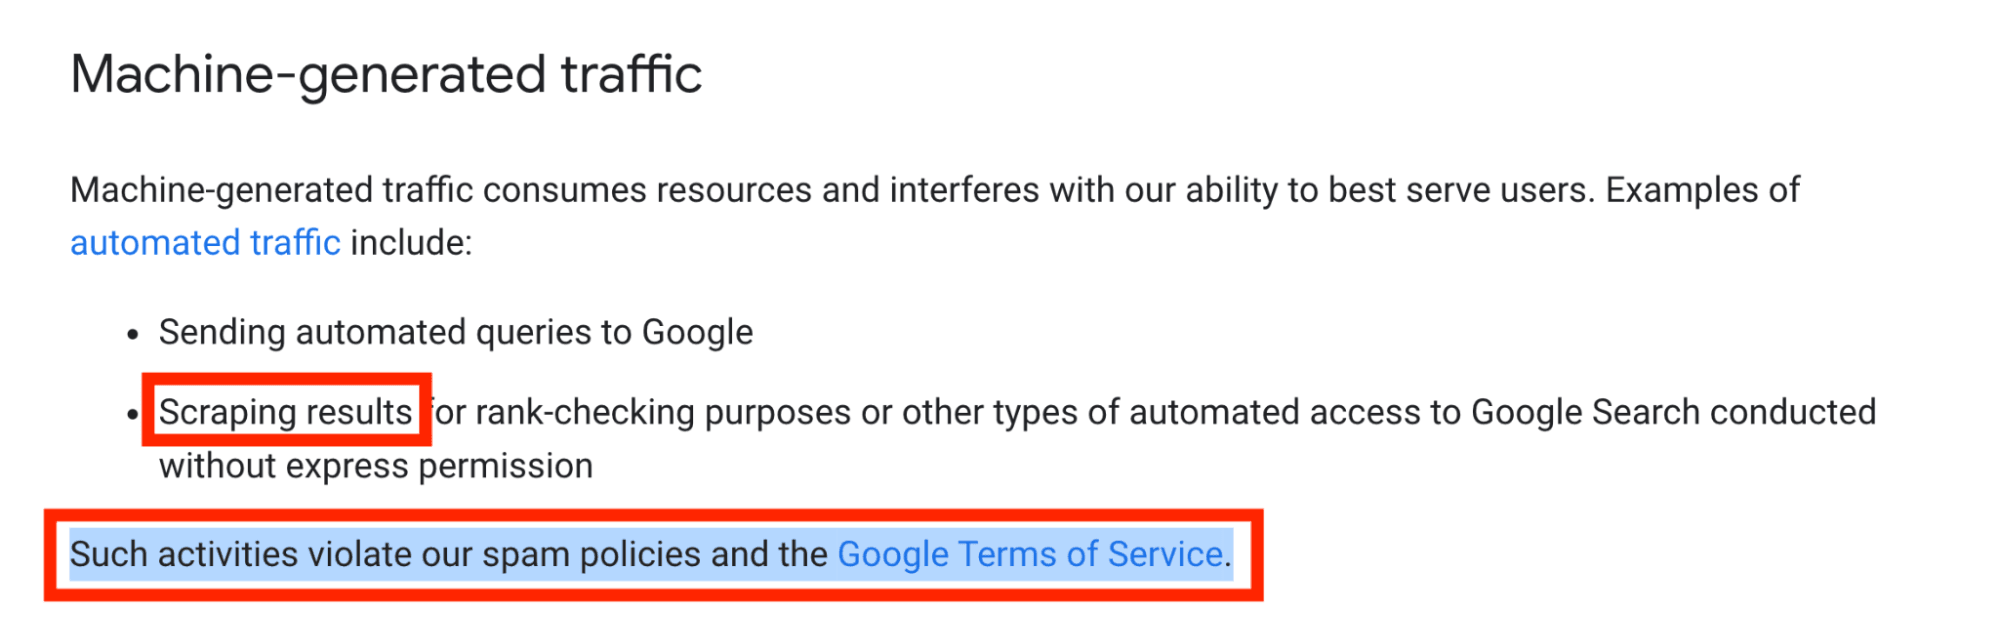 scraping violates google terms of service.png